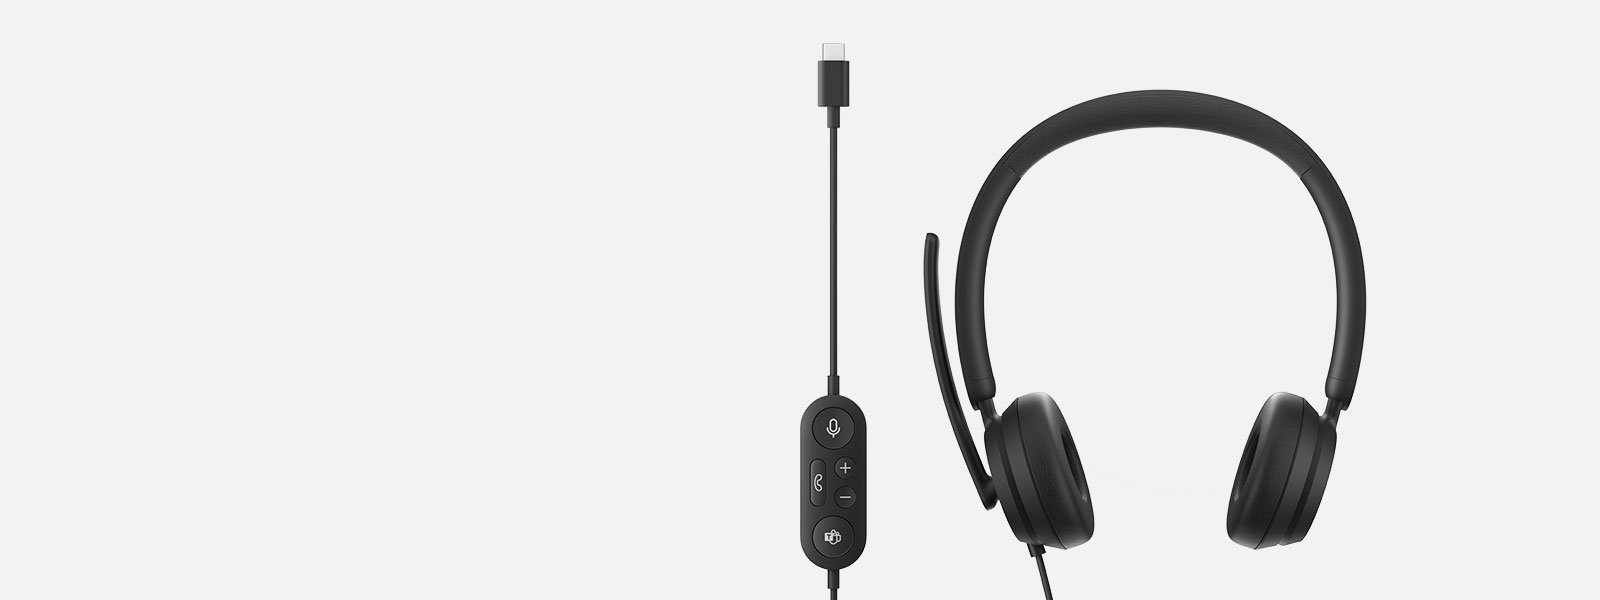 Microsoft Modern USB-C Headset with Noise Reducing Microphone, Certified  for Microsoft Teams